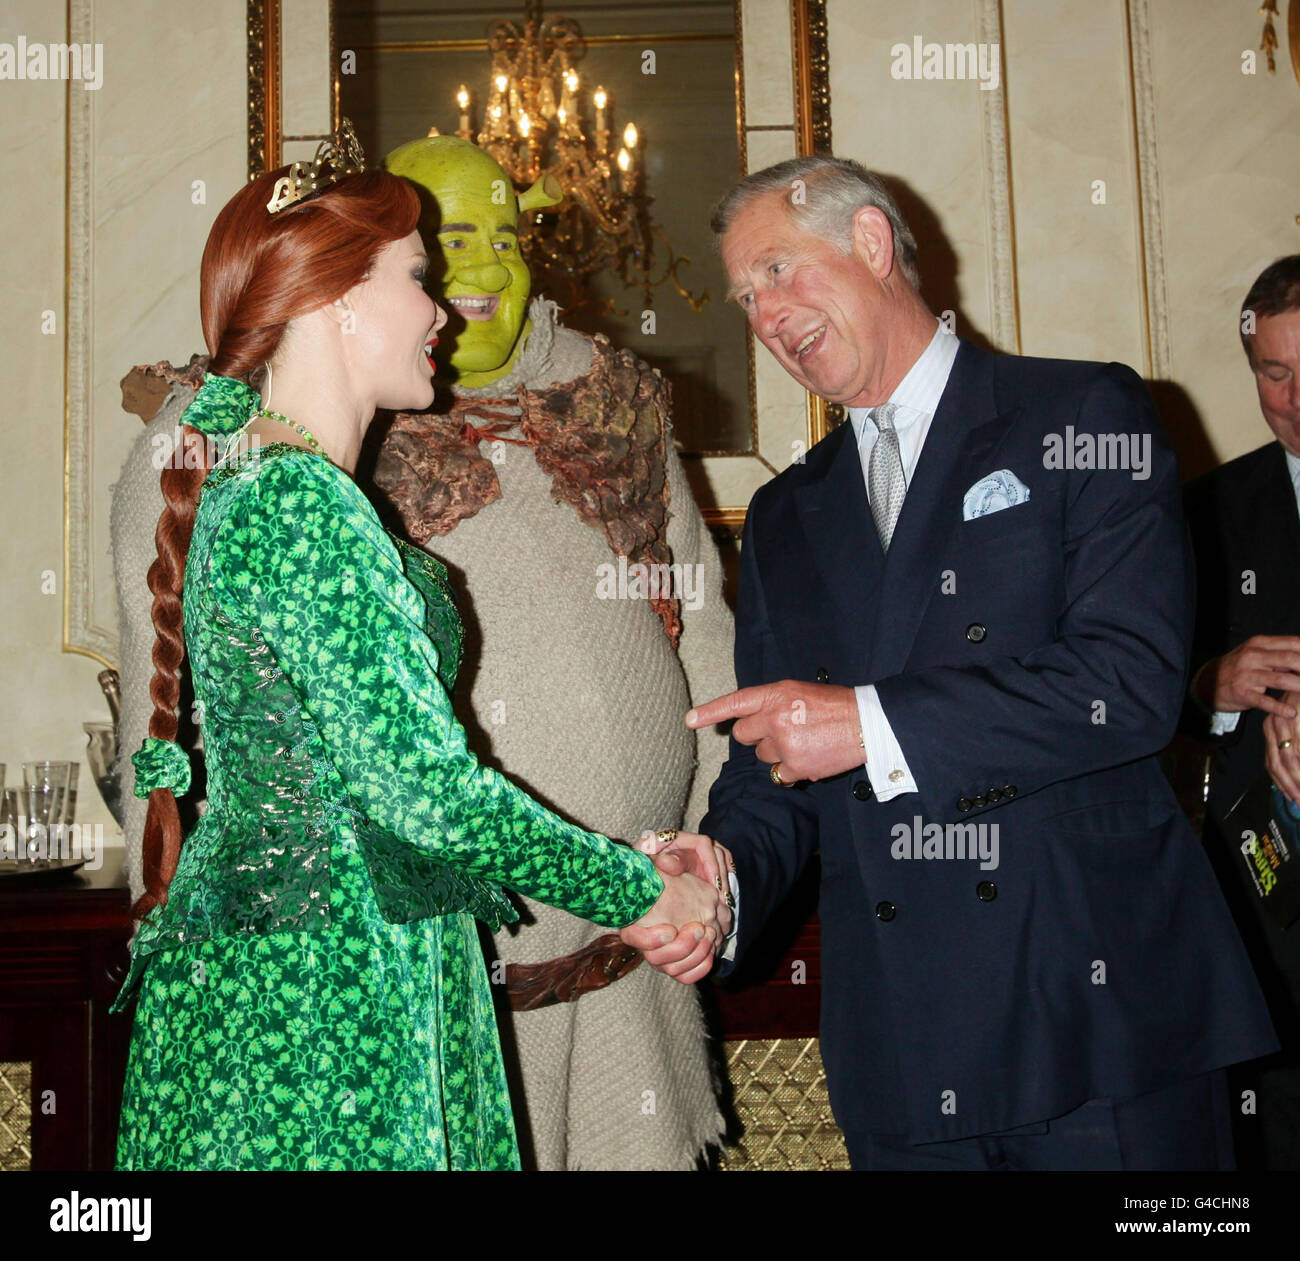 The Prince of Wales meets Nigel Lindsay as Shrek and Amanda Holden as Princess Fiona, before a special performance of Shrek The Musical at the Theatre Royal in Drury Lane, London. Stock Photo